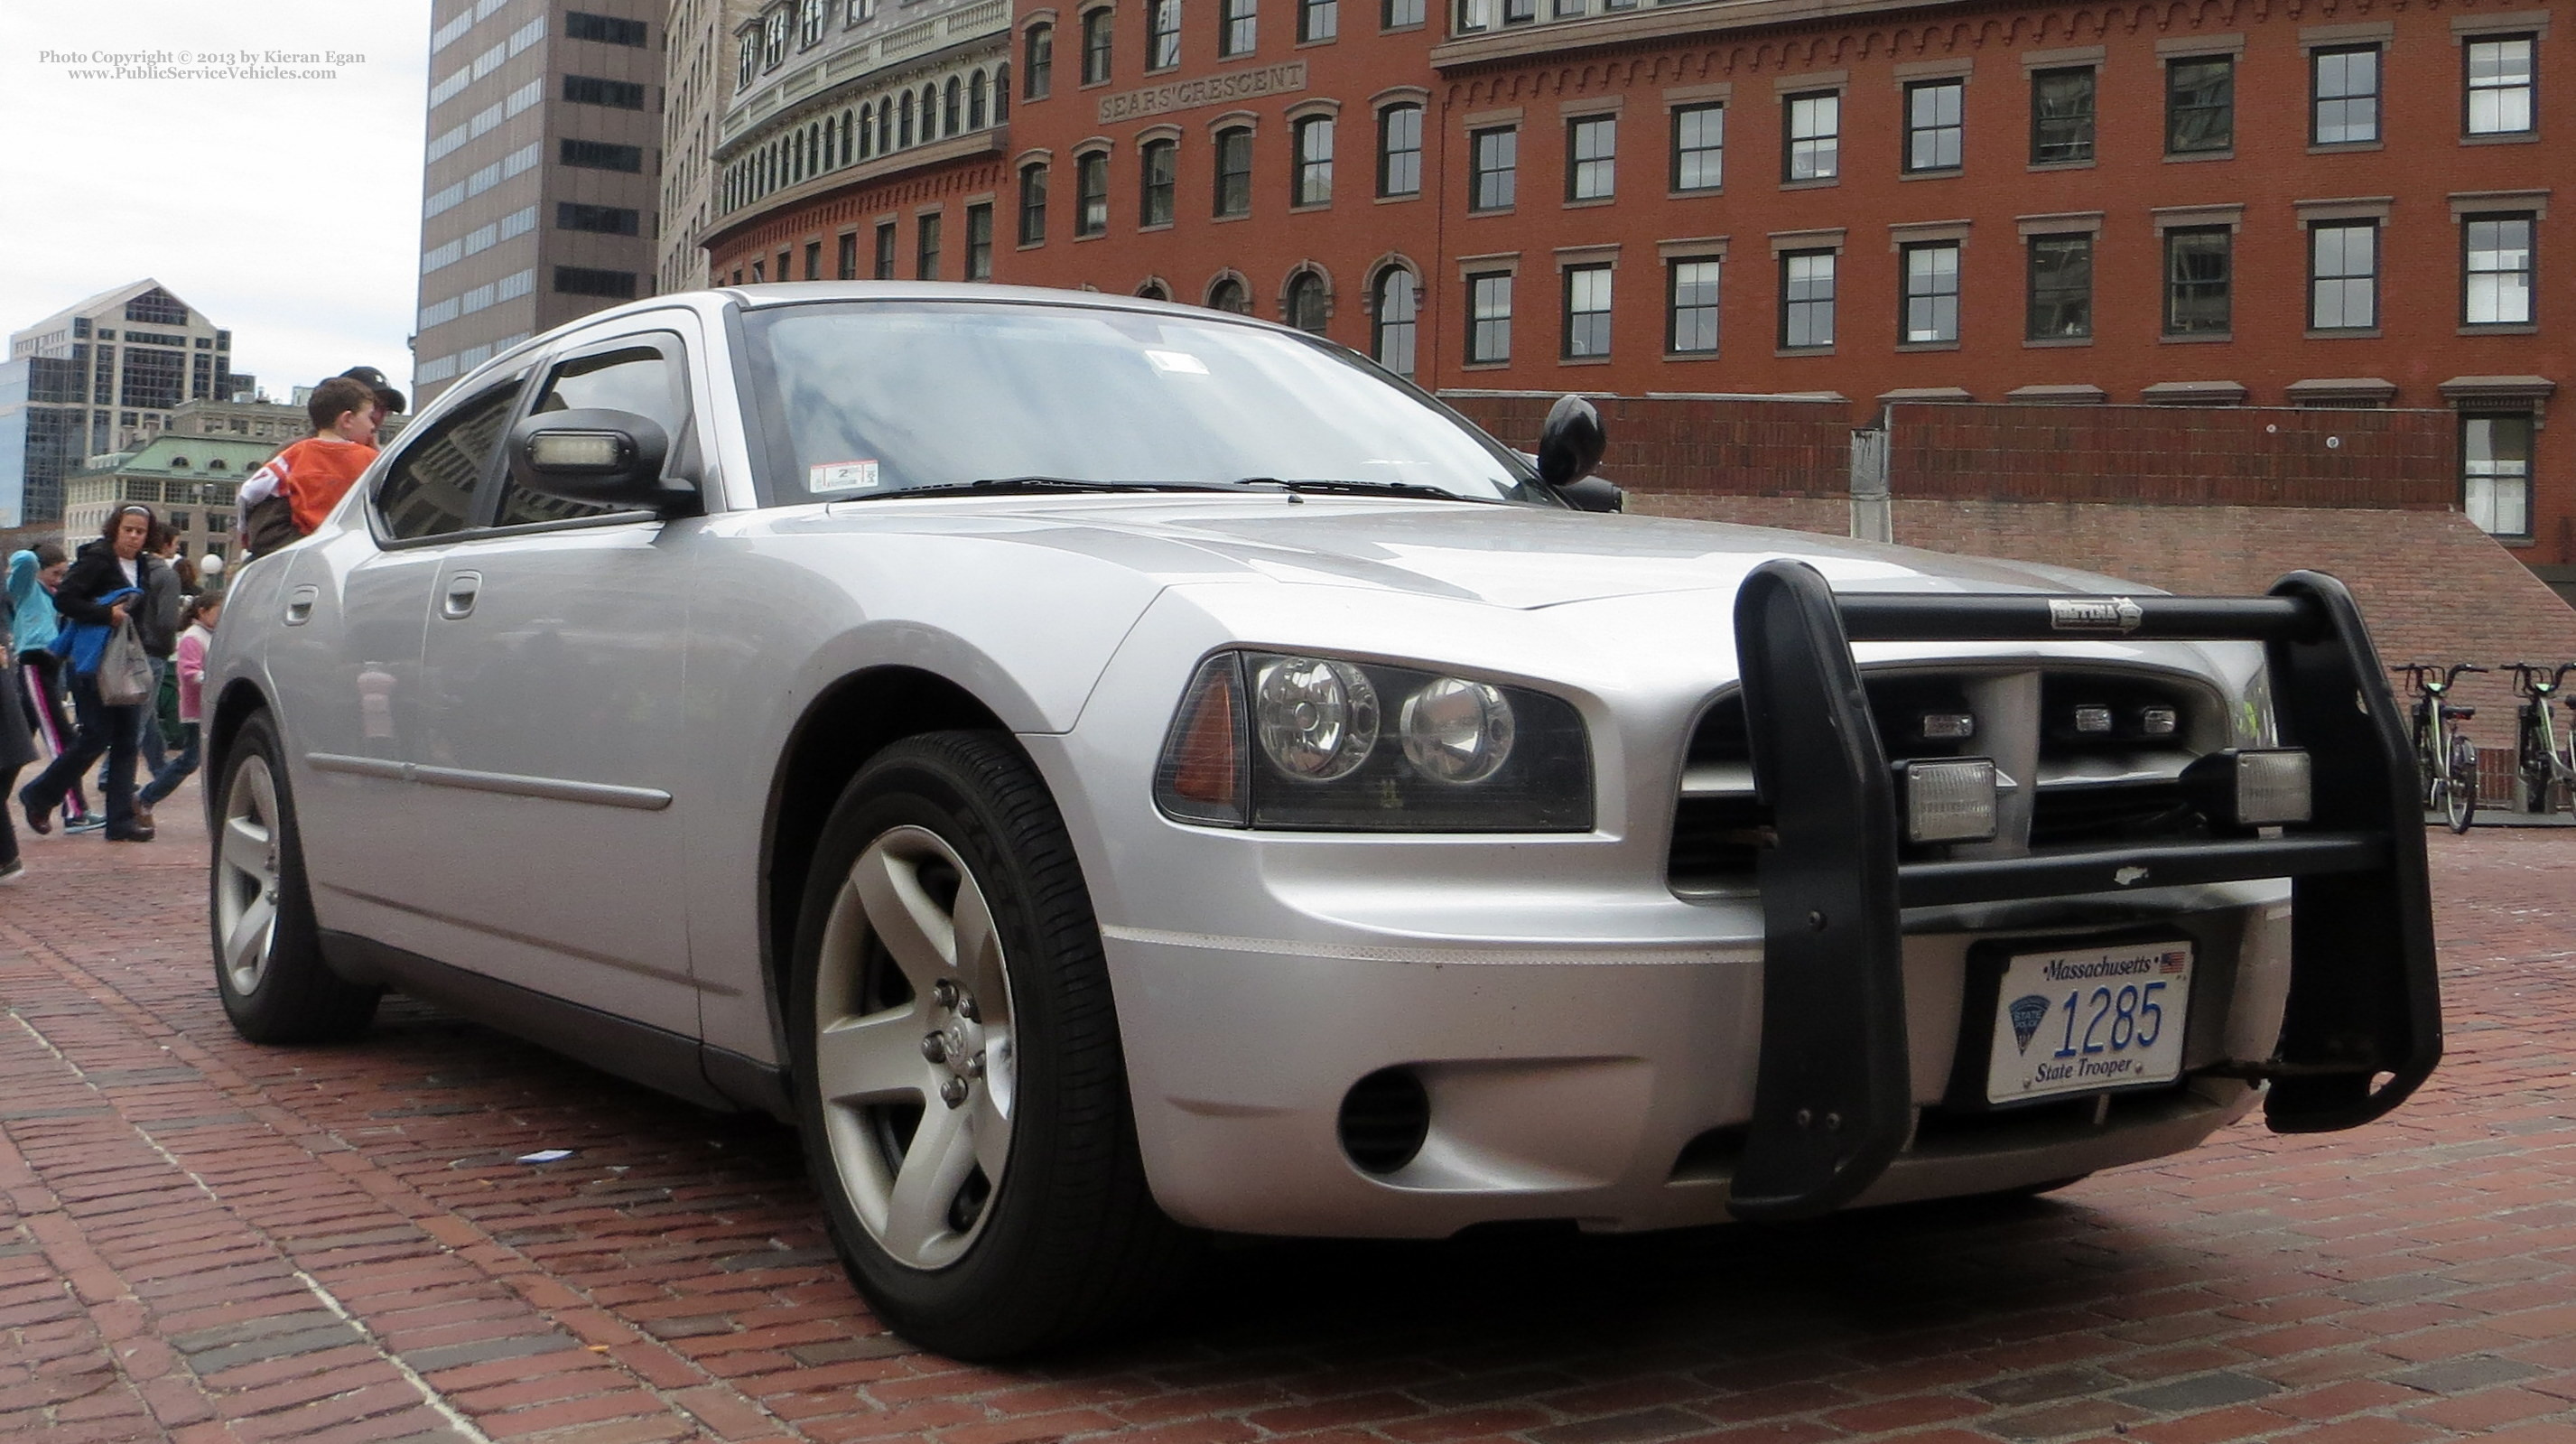 A photo  of Massachusetts State Police
            Cruiser 1285, a 2006-2010 Dodge Charger             taken by Kieran Egan